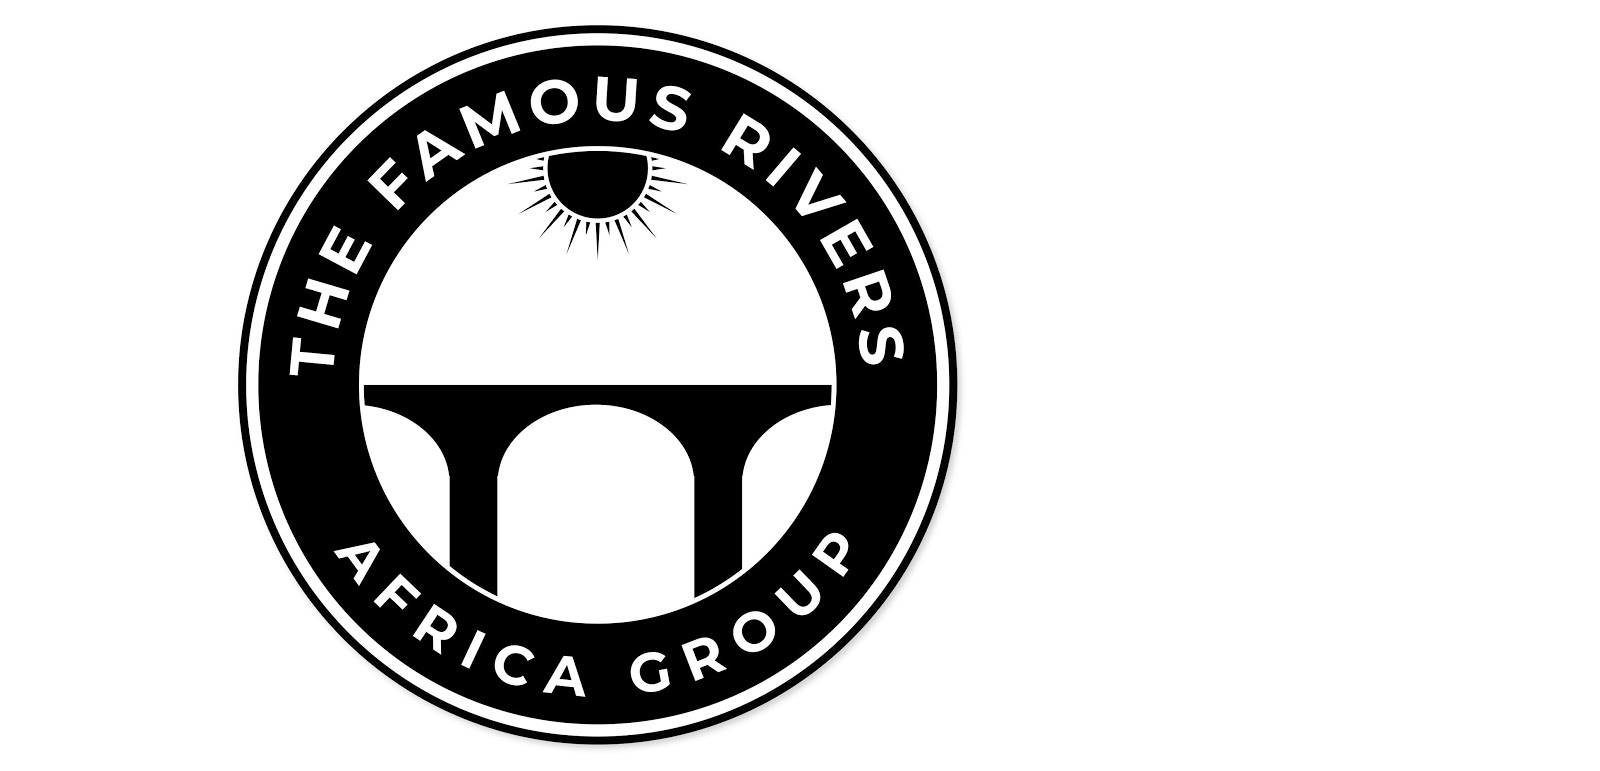 The Famous Rivers Africa Group